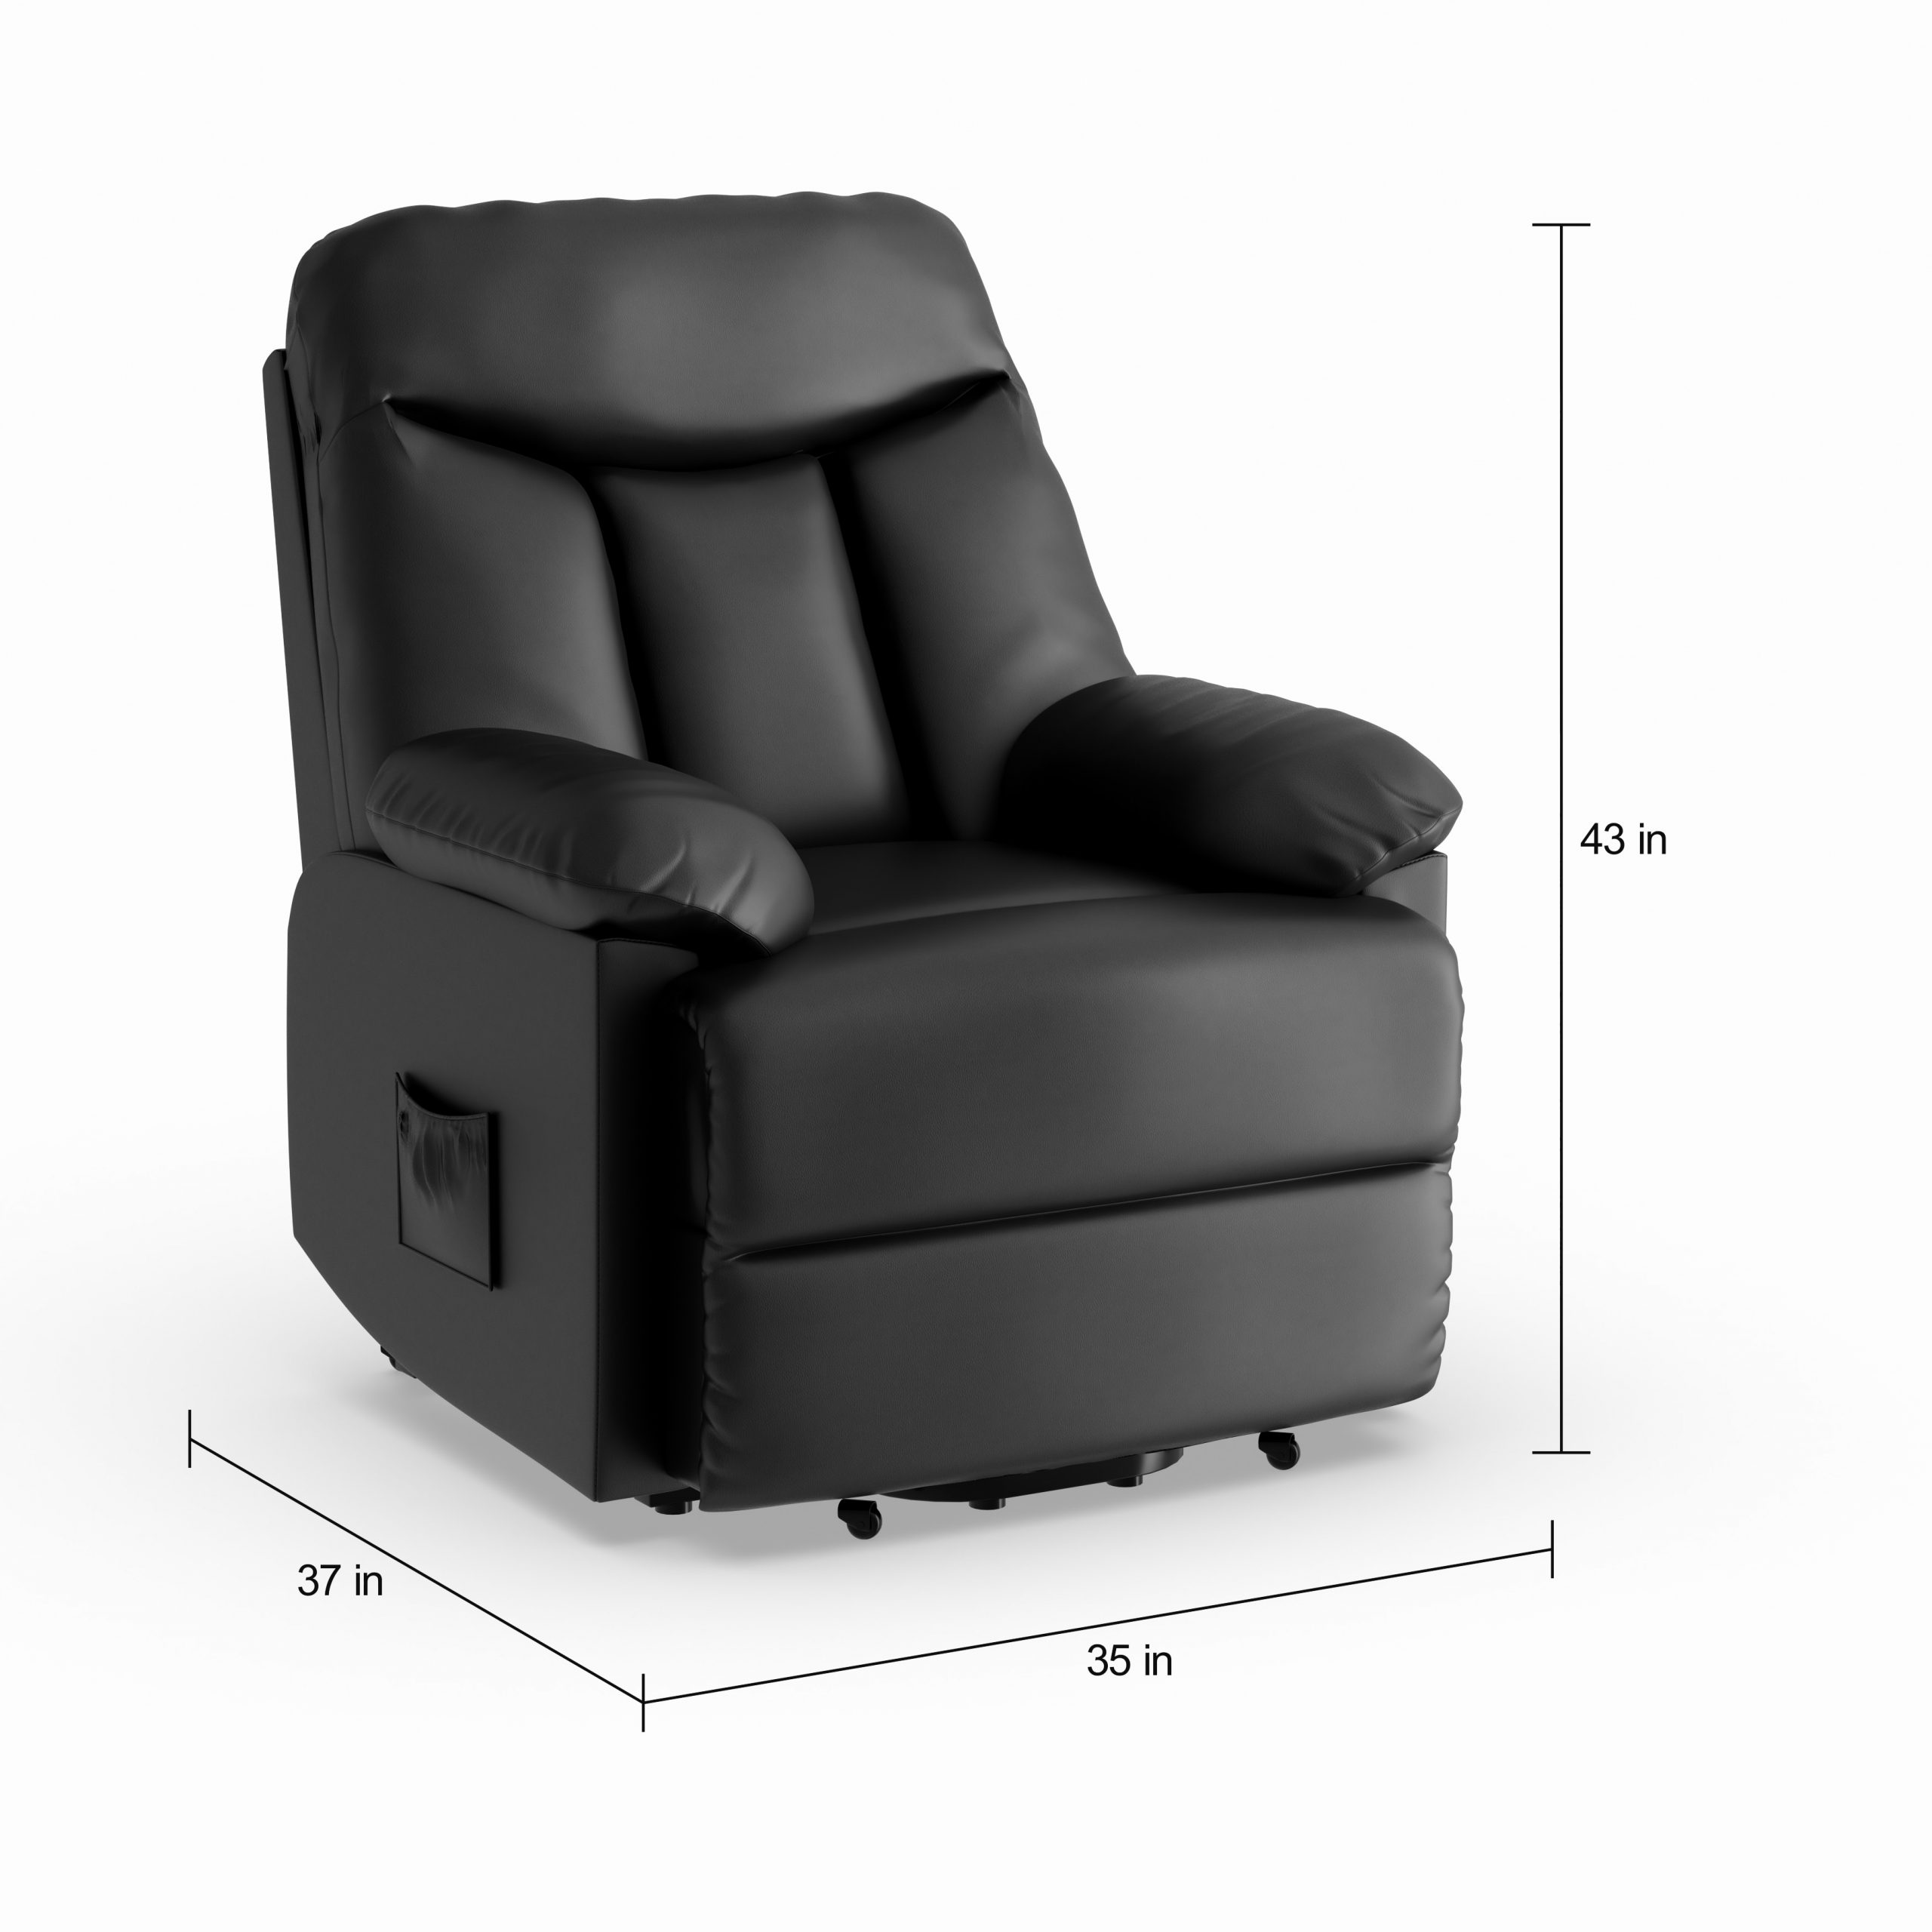 Fully Reclining Chair Medicare